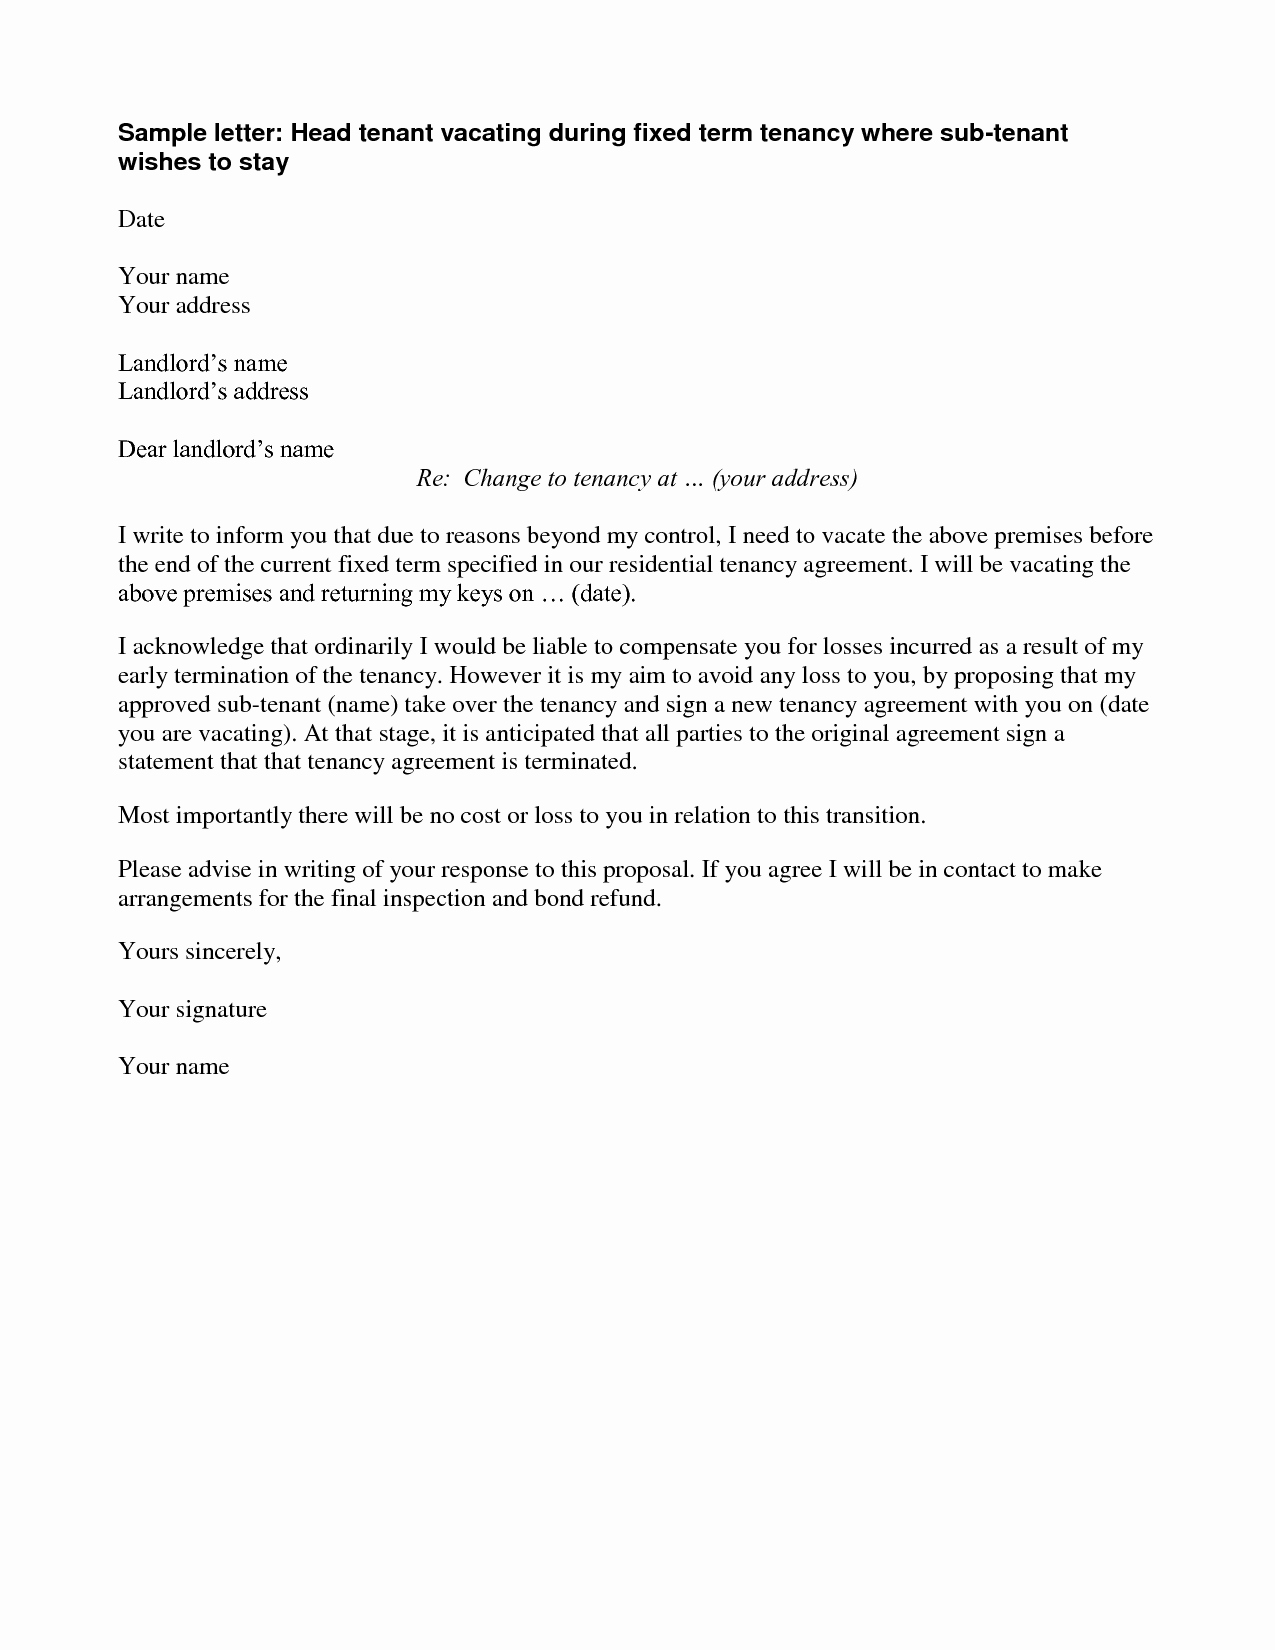 Contract Termination Letter Template Awesome Agreement Termination Letter This Contract Termination